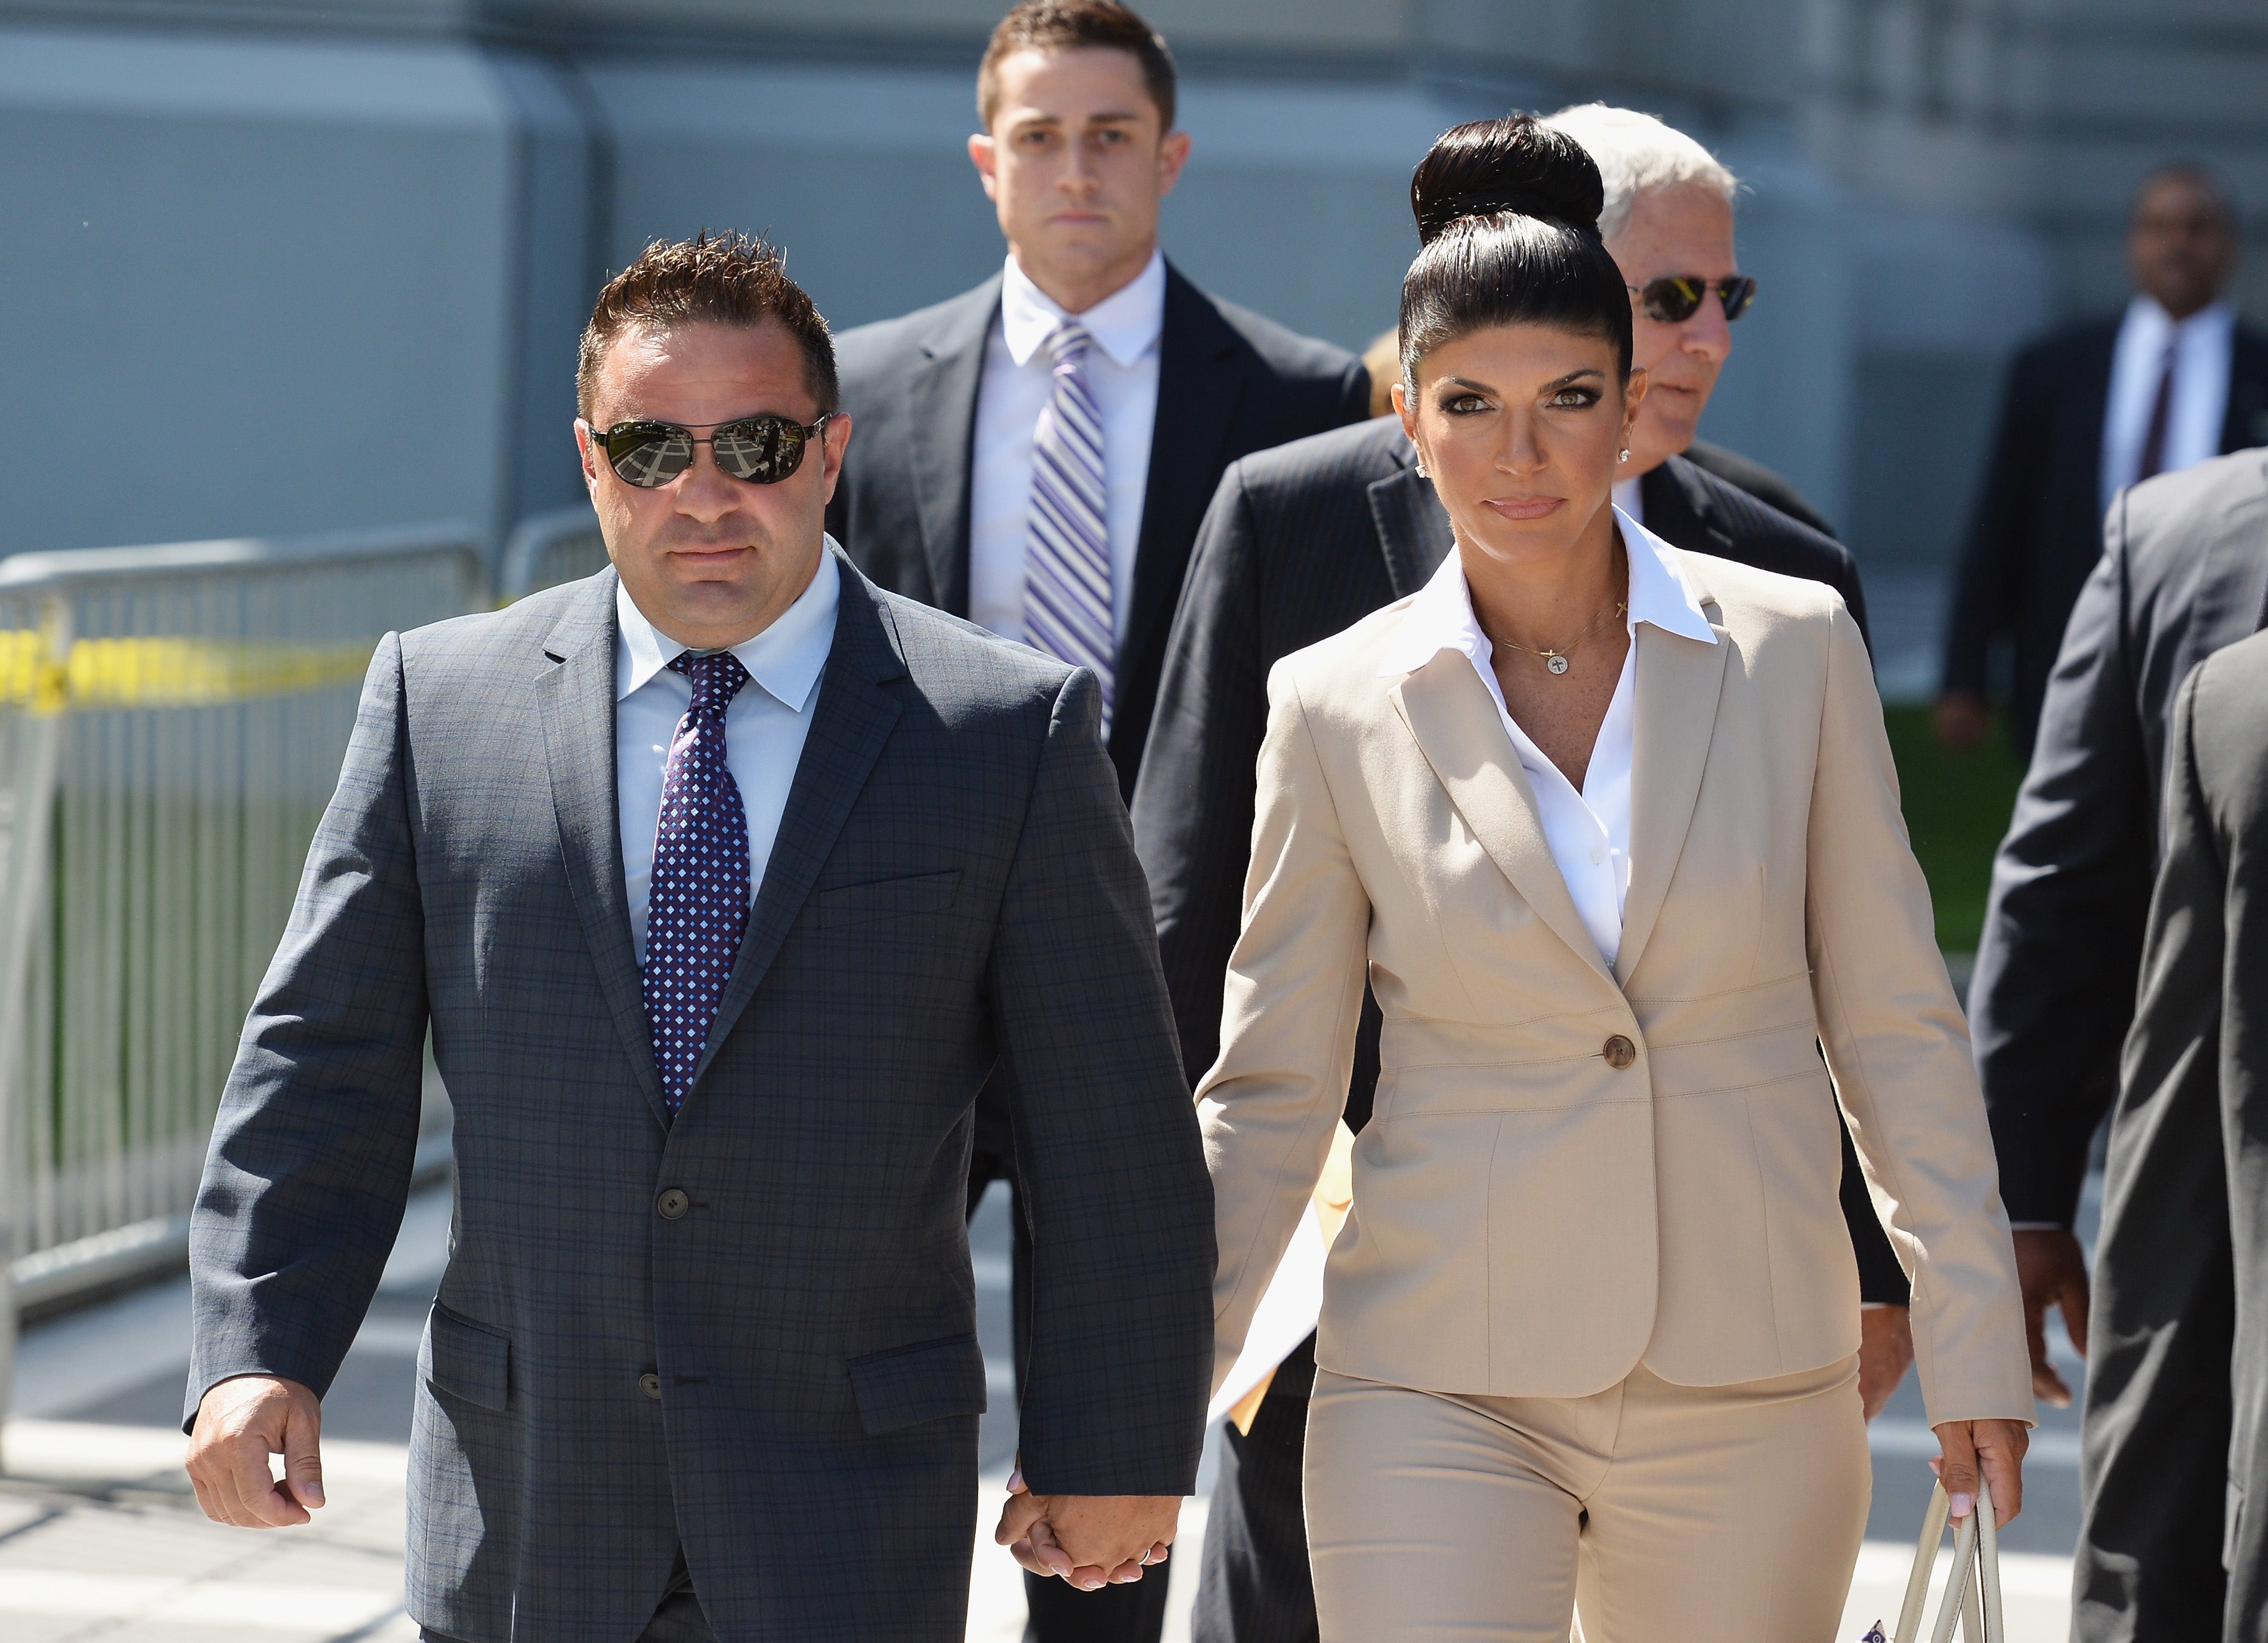 Joe and Teresa Giudice leave court after facing charges of bankruptcy and mail fraud